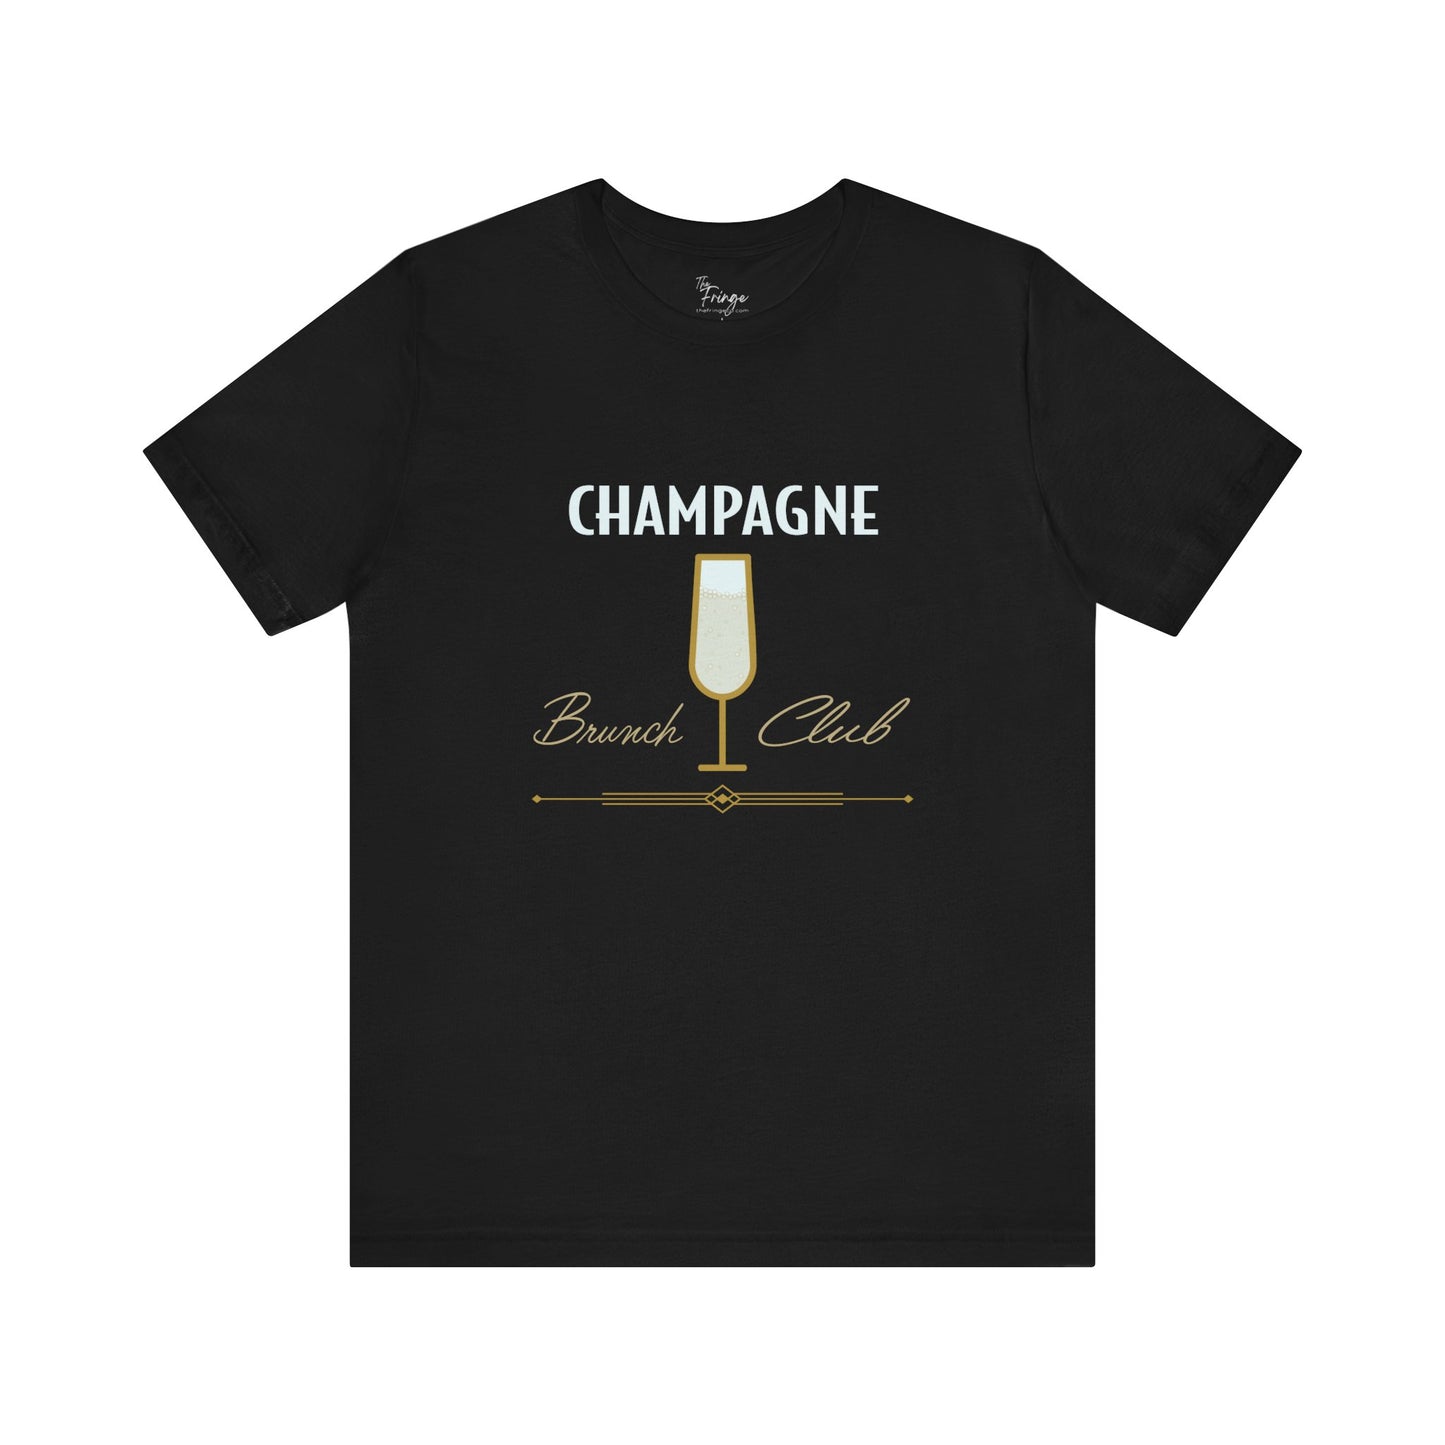 Champagne Brunch Club Graphic Tee | Girls Trip T-shirt | Bottomless Mimosa Girls | Gift for Friend